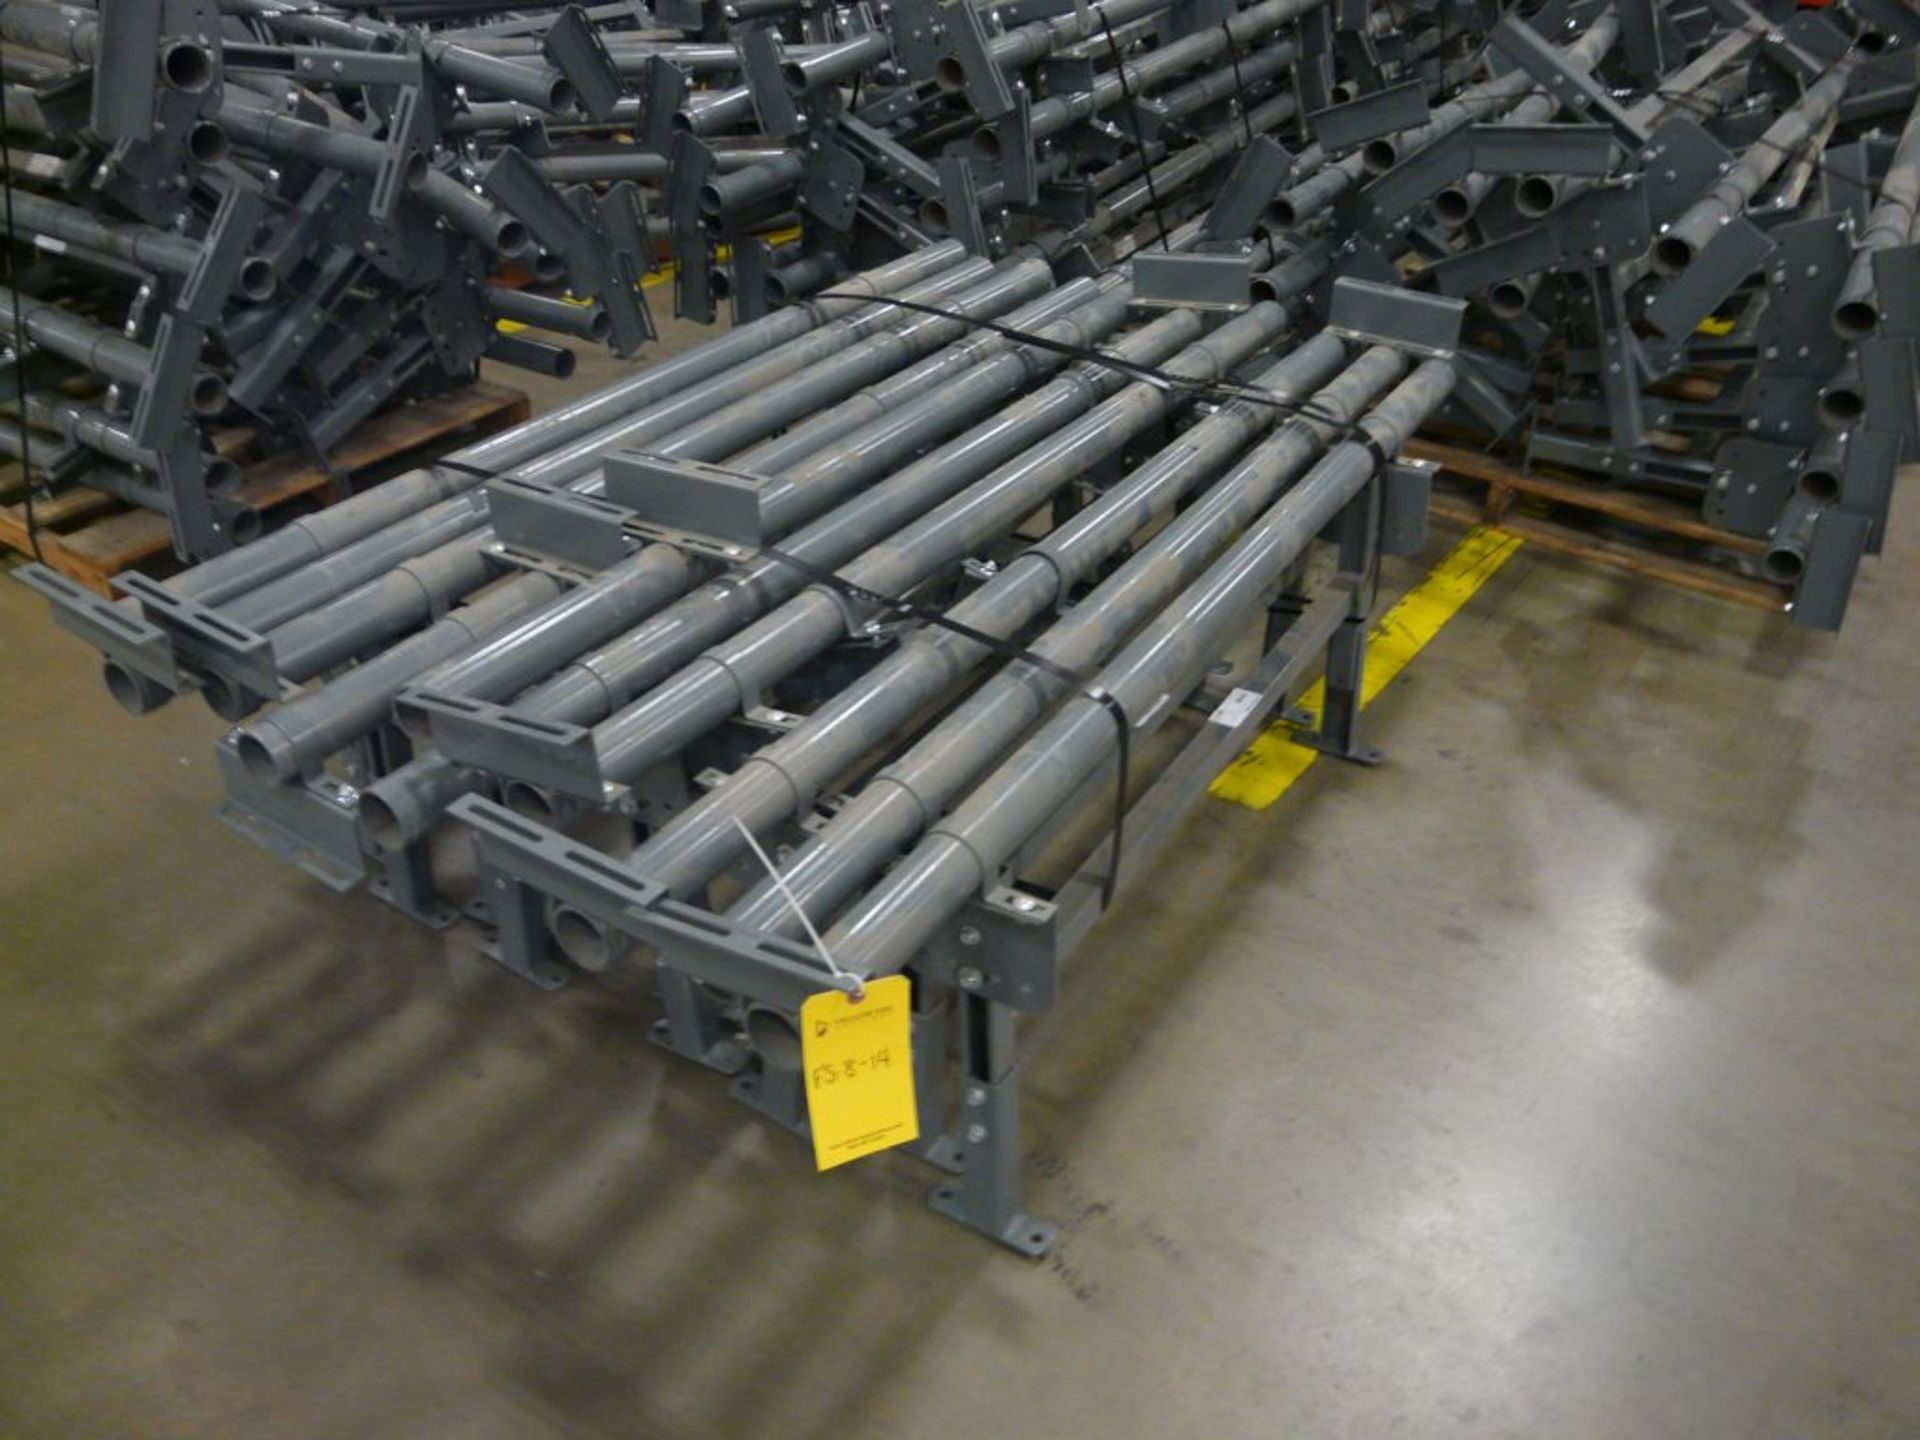 Lot of (5) USA Floor Supports - Brace: 71"L; Stand: 44"L x 19"H; Tag: 223840 - $30 Lot Loading Fee - Image 2 of 4